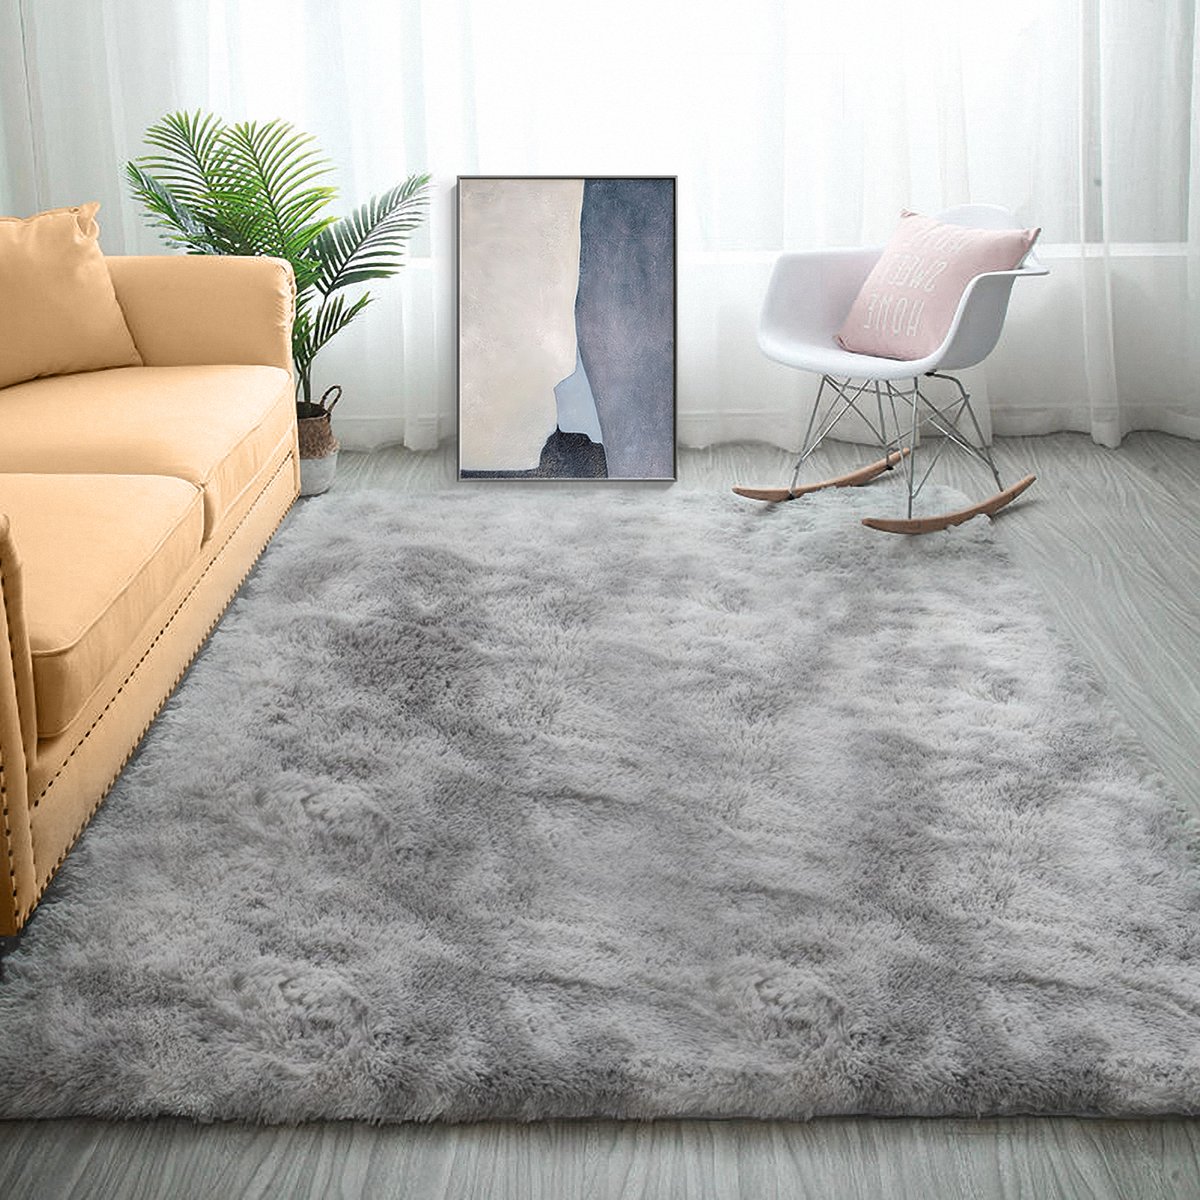 🌈 Add a touch of elegance to your floors with our plush rugs! 
✨ Experience premium quality and immerse yourself in pure luxury. Step into a world of style and comfort and embrace the art of living! 
🏰 #PlushCarpets #ElegantLiving #LuxuriousComfort